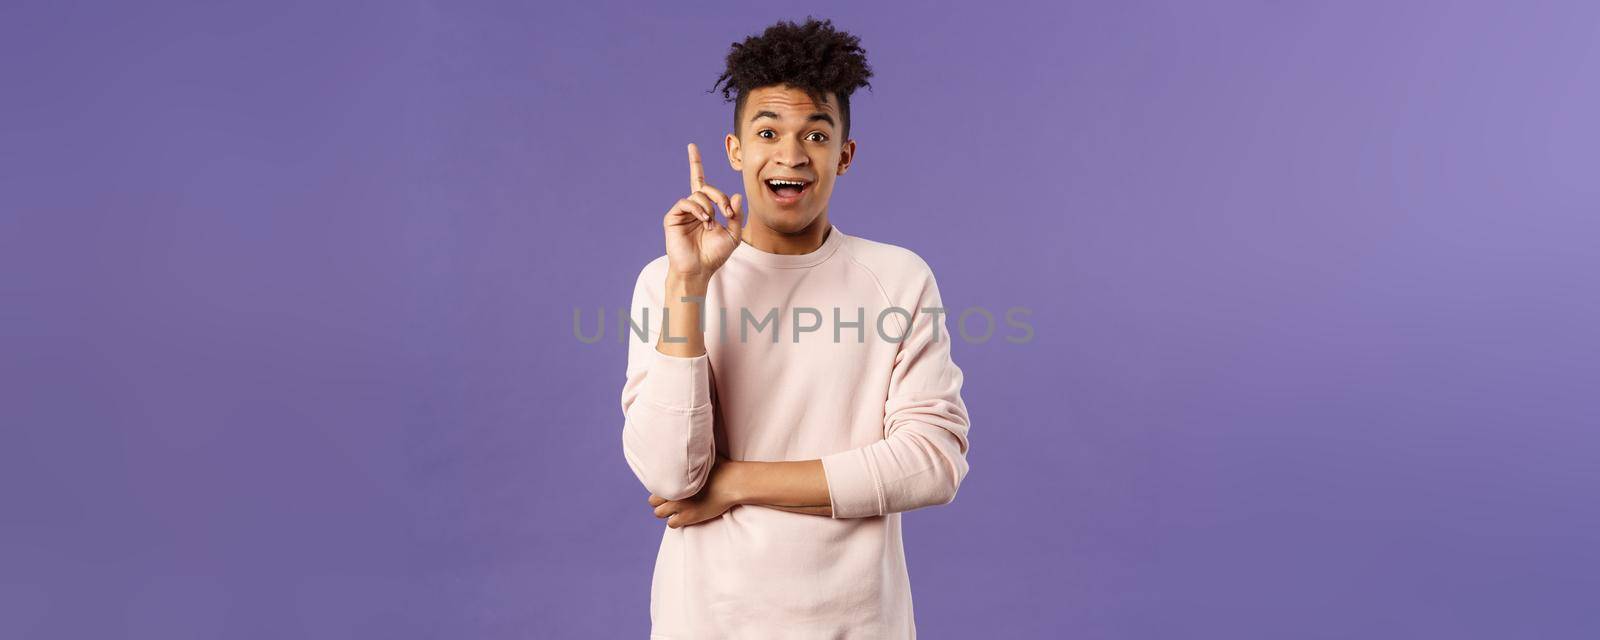 Portrait of excited happy man finally understood something, have great idea, express suggestion or opinion, raise finger up eureka gesture, smiling upbeat got nice plan, purple background.